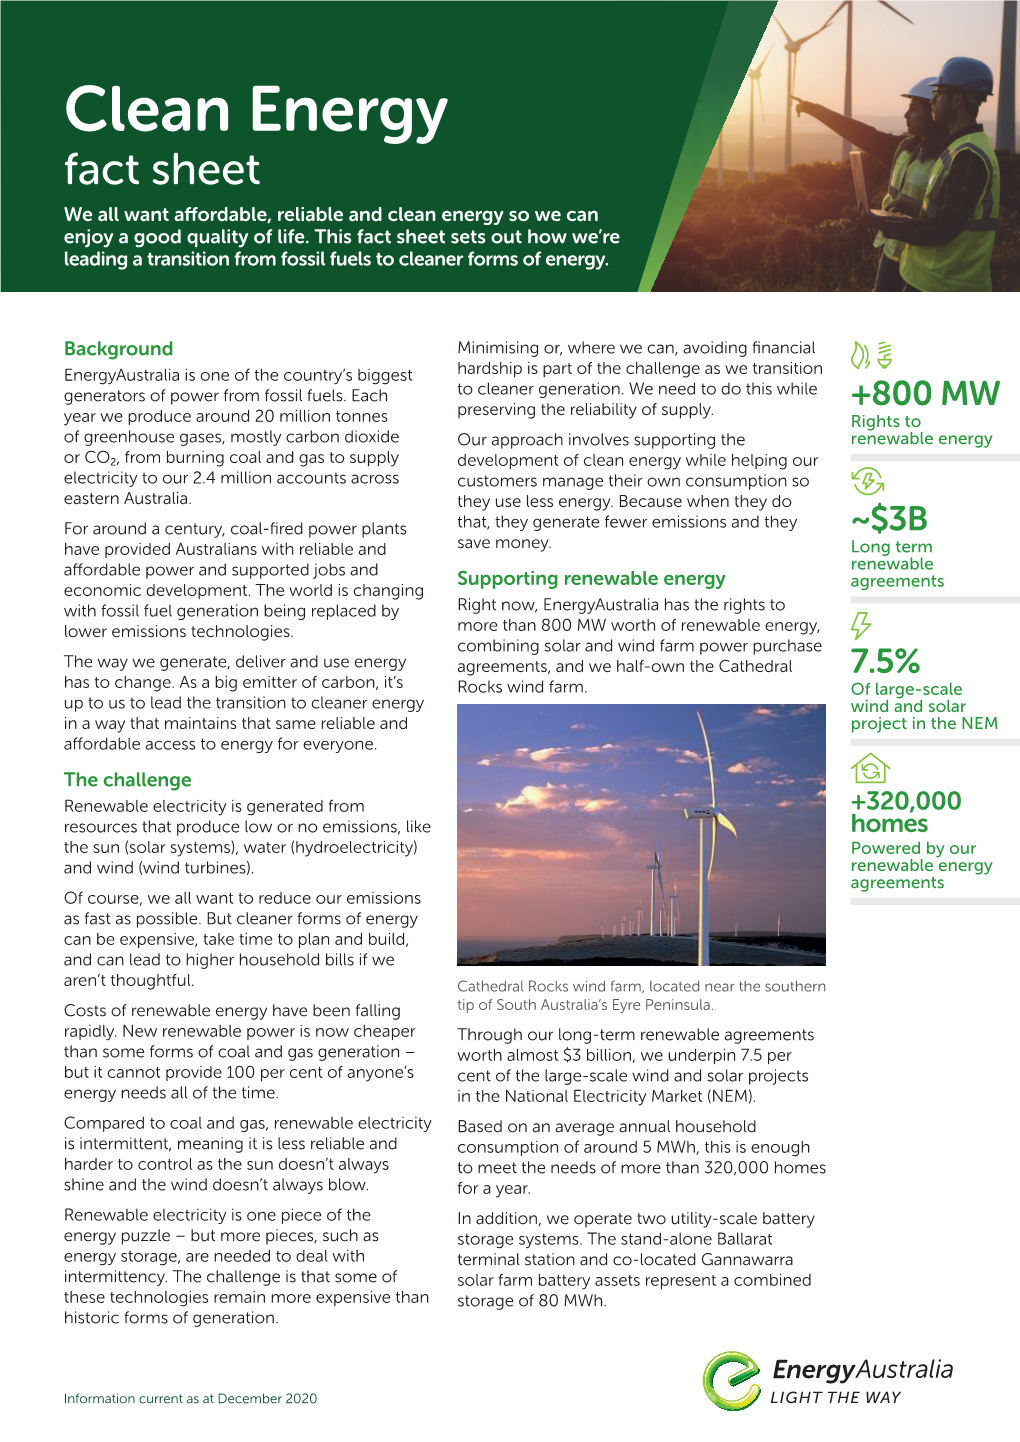 Clean Energy Fact Sheet We All Want Affordable, Reliable and Clean Energy So We Can Enjoy a Good Quality of Life